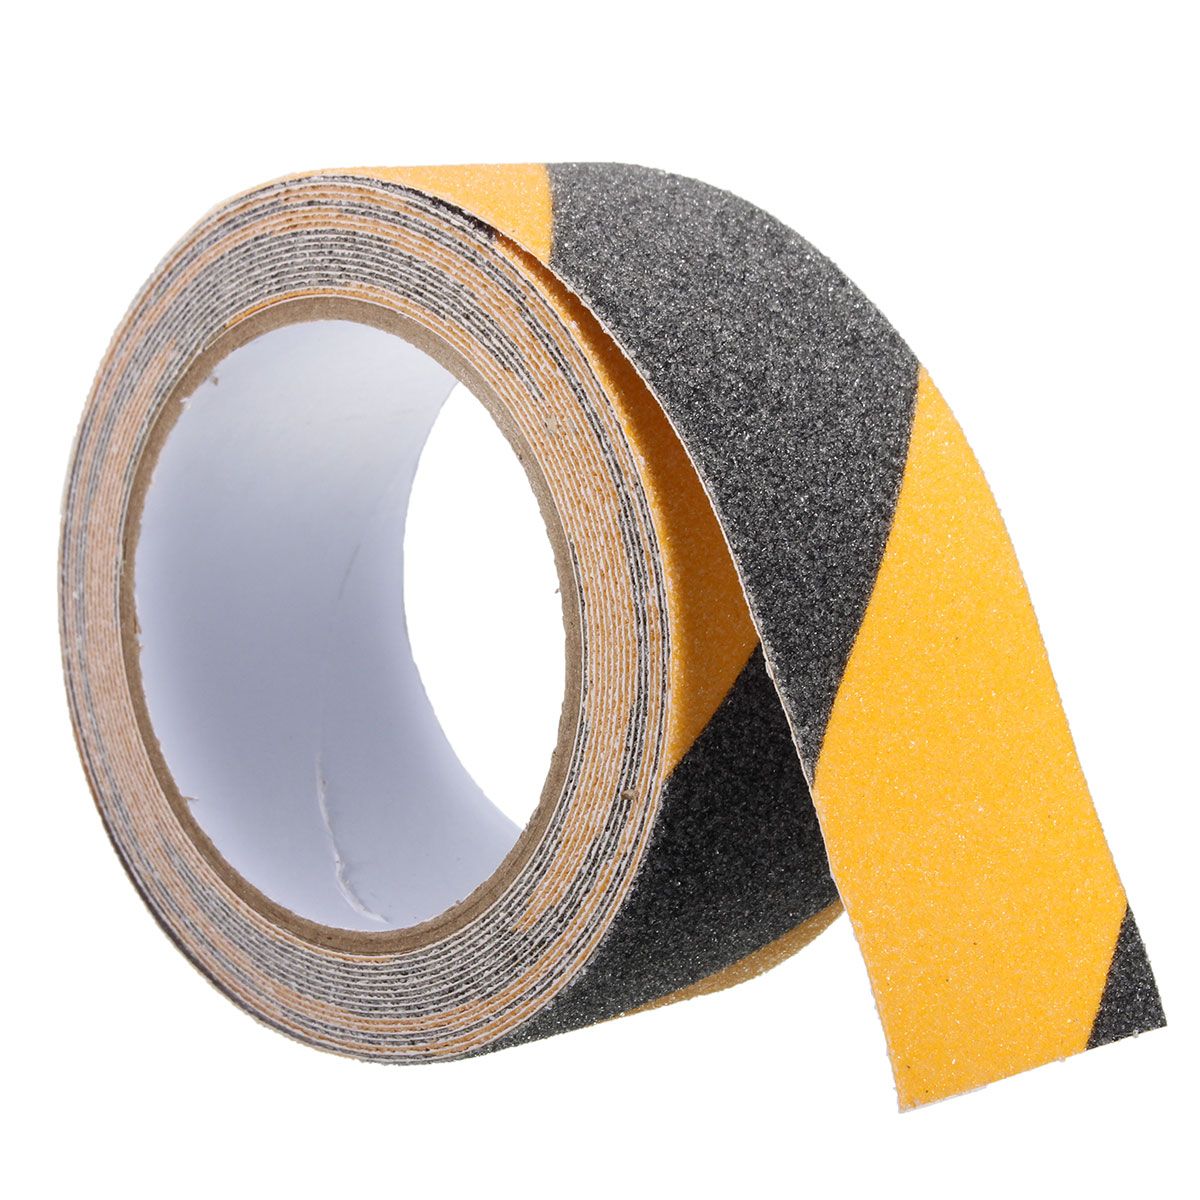 5CM-x-5M-Non-Slip-In-The-Dark-Tape-Anti-Slip-Adhesive-Grip-for-Stairs-and-Gaffers-165-Feet-Long-1382967-10